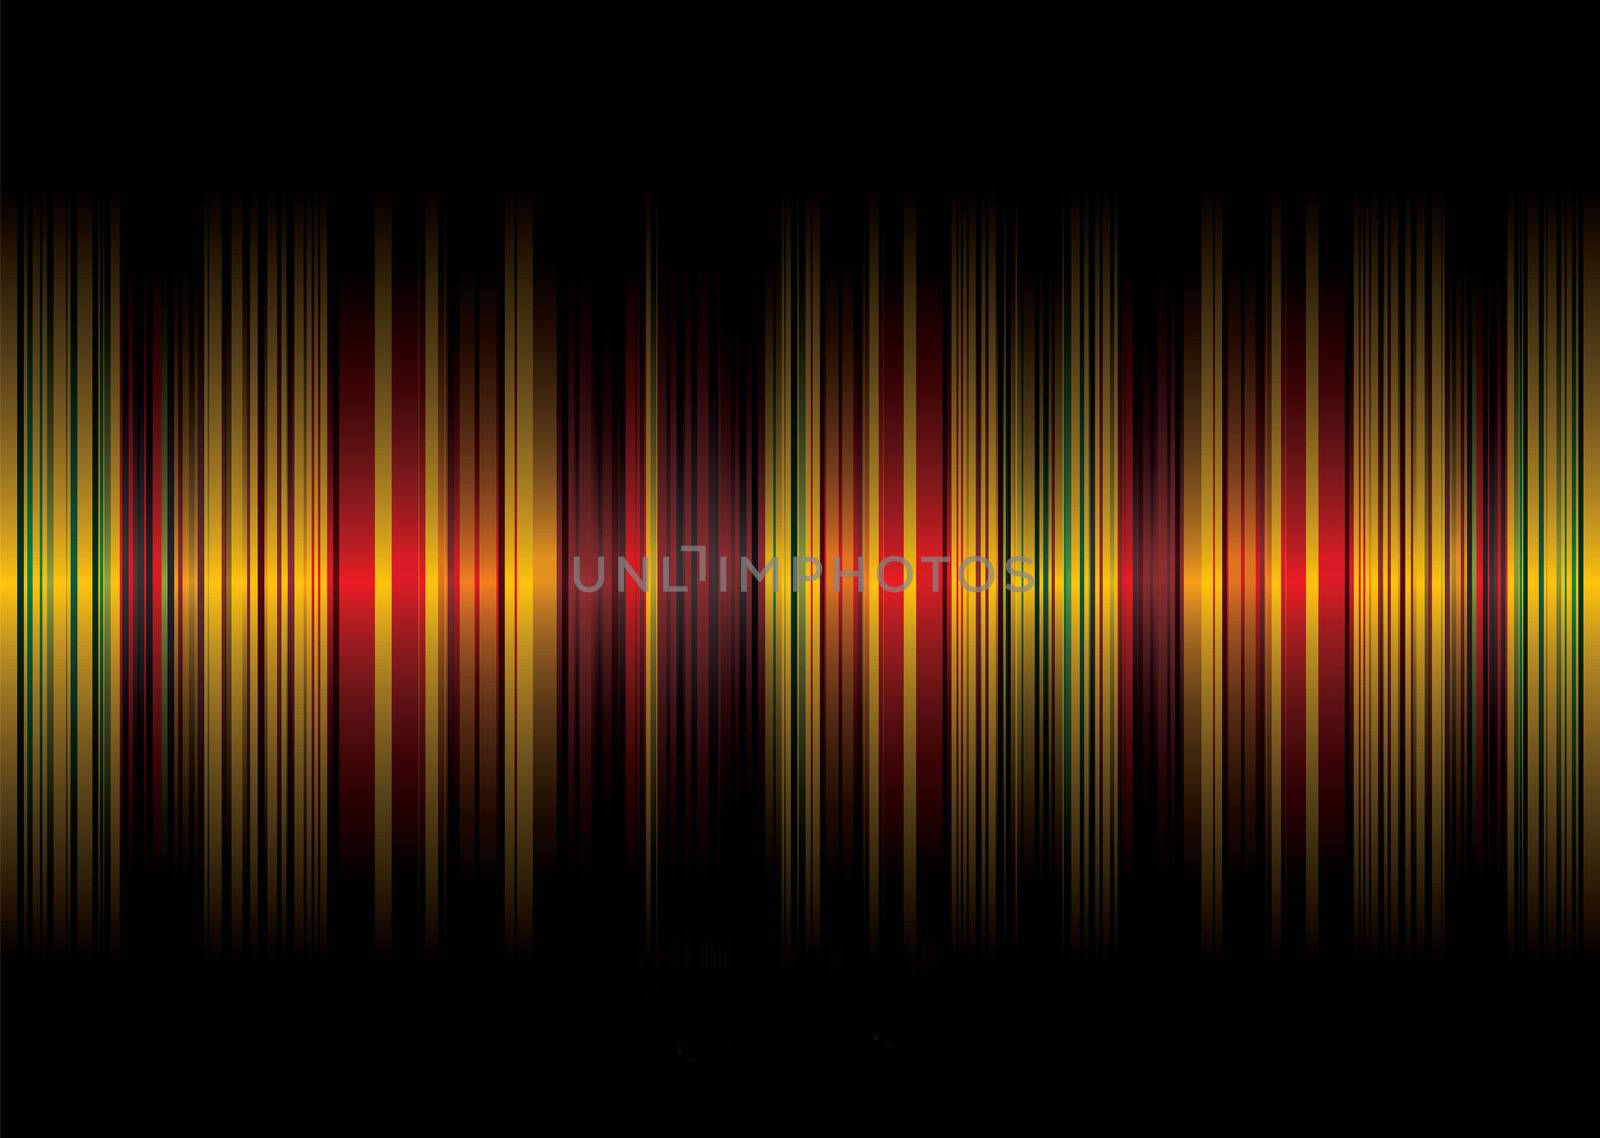 golden stripe abstract pattern background with room for text